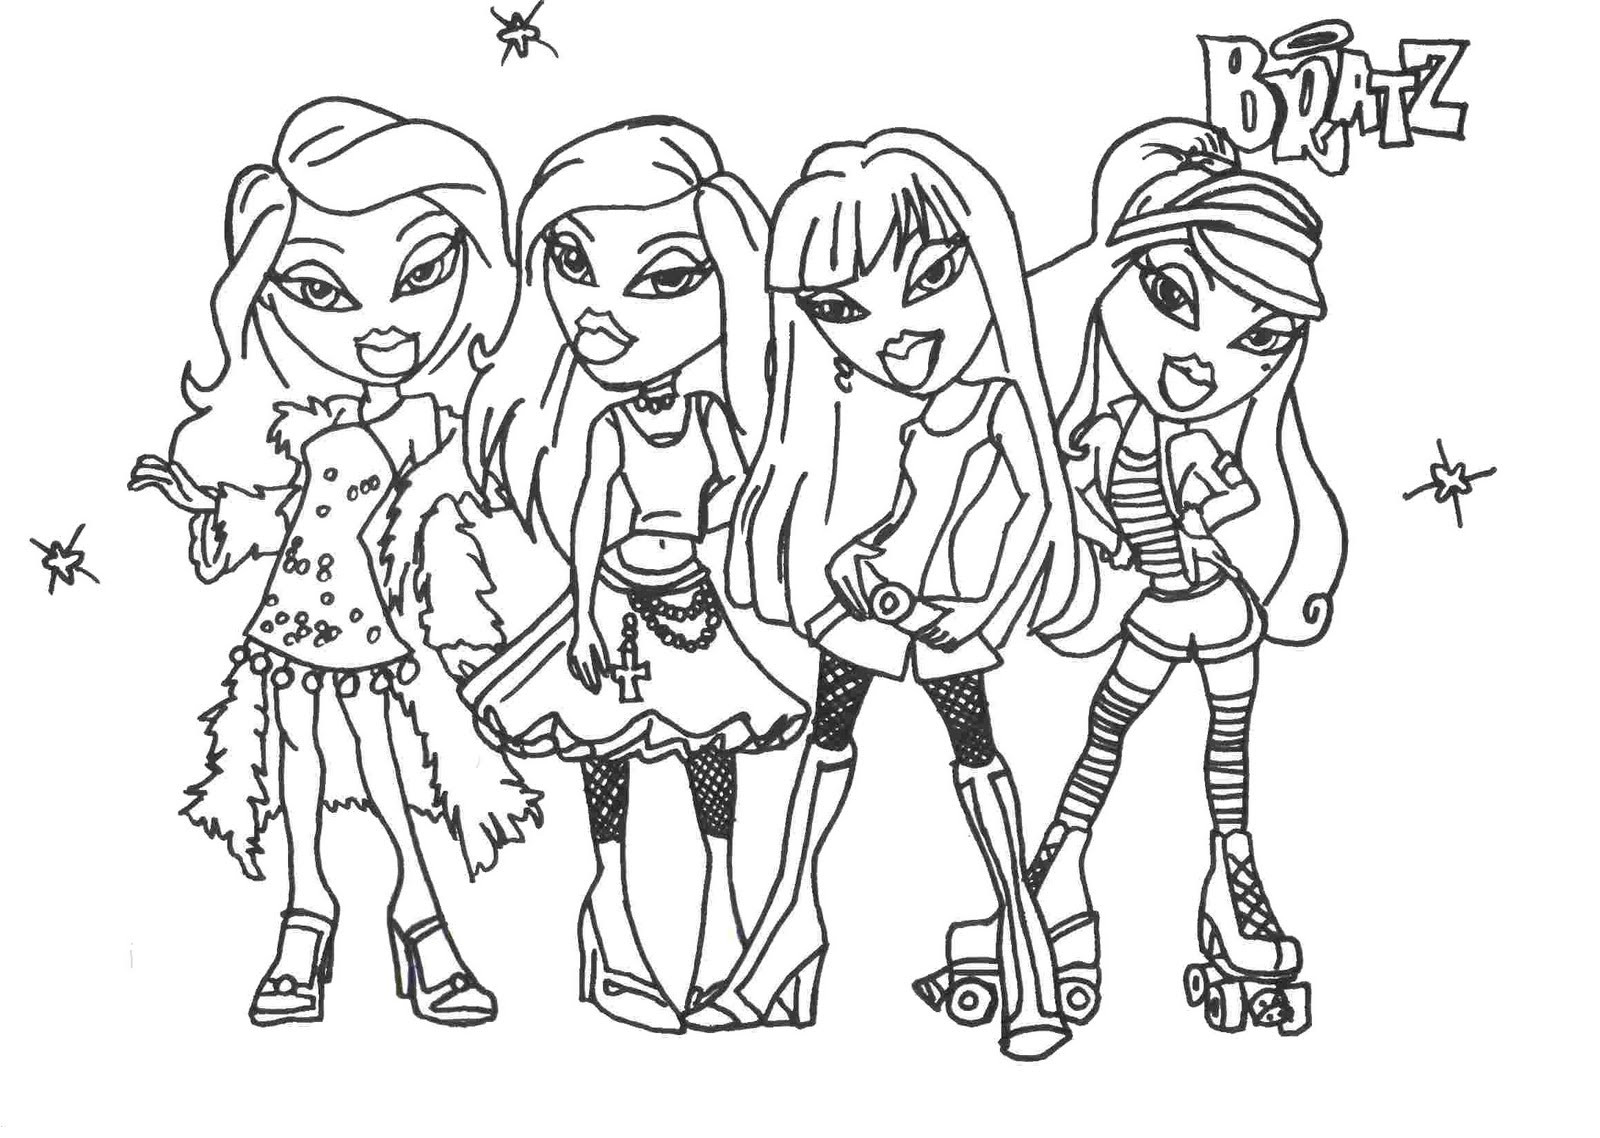 Coloring Sheets For Girls 8 10
 Coloring Pages For Girls 8